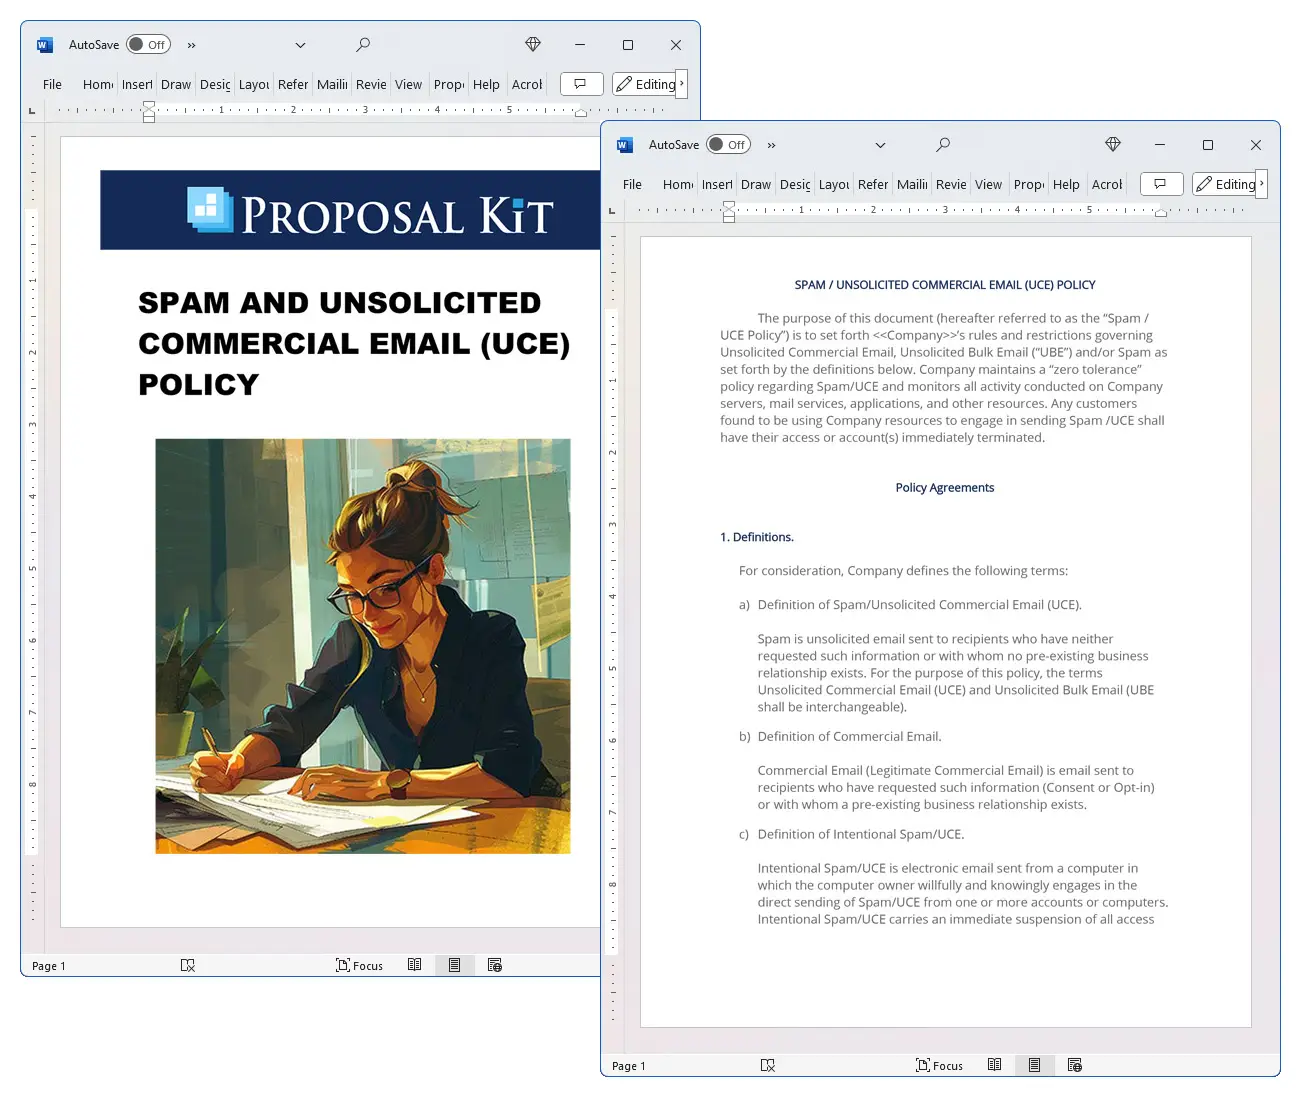 Spam and Unsolicited Commercial Email (UCE) Policy Concepts